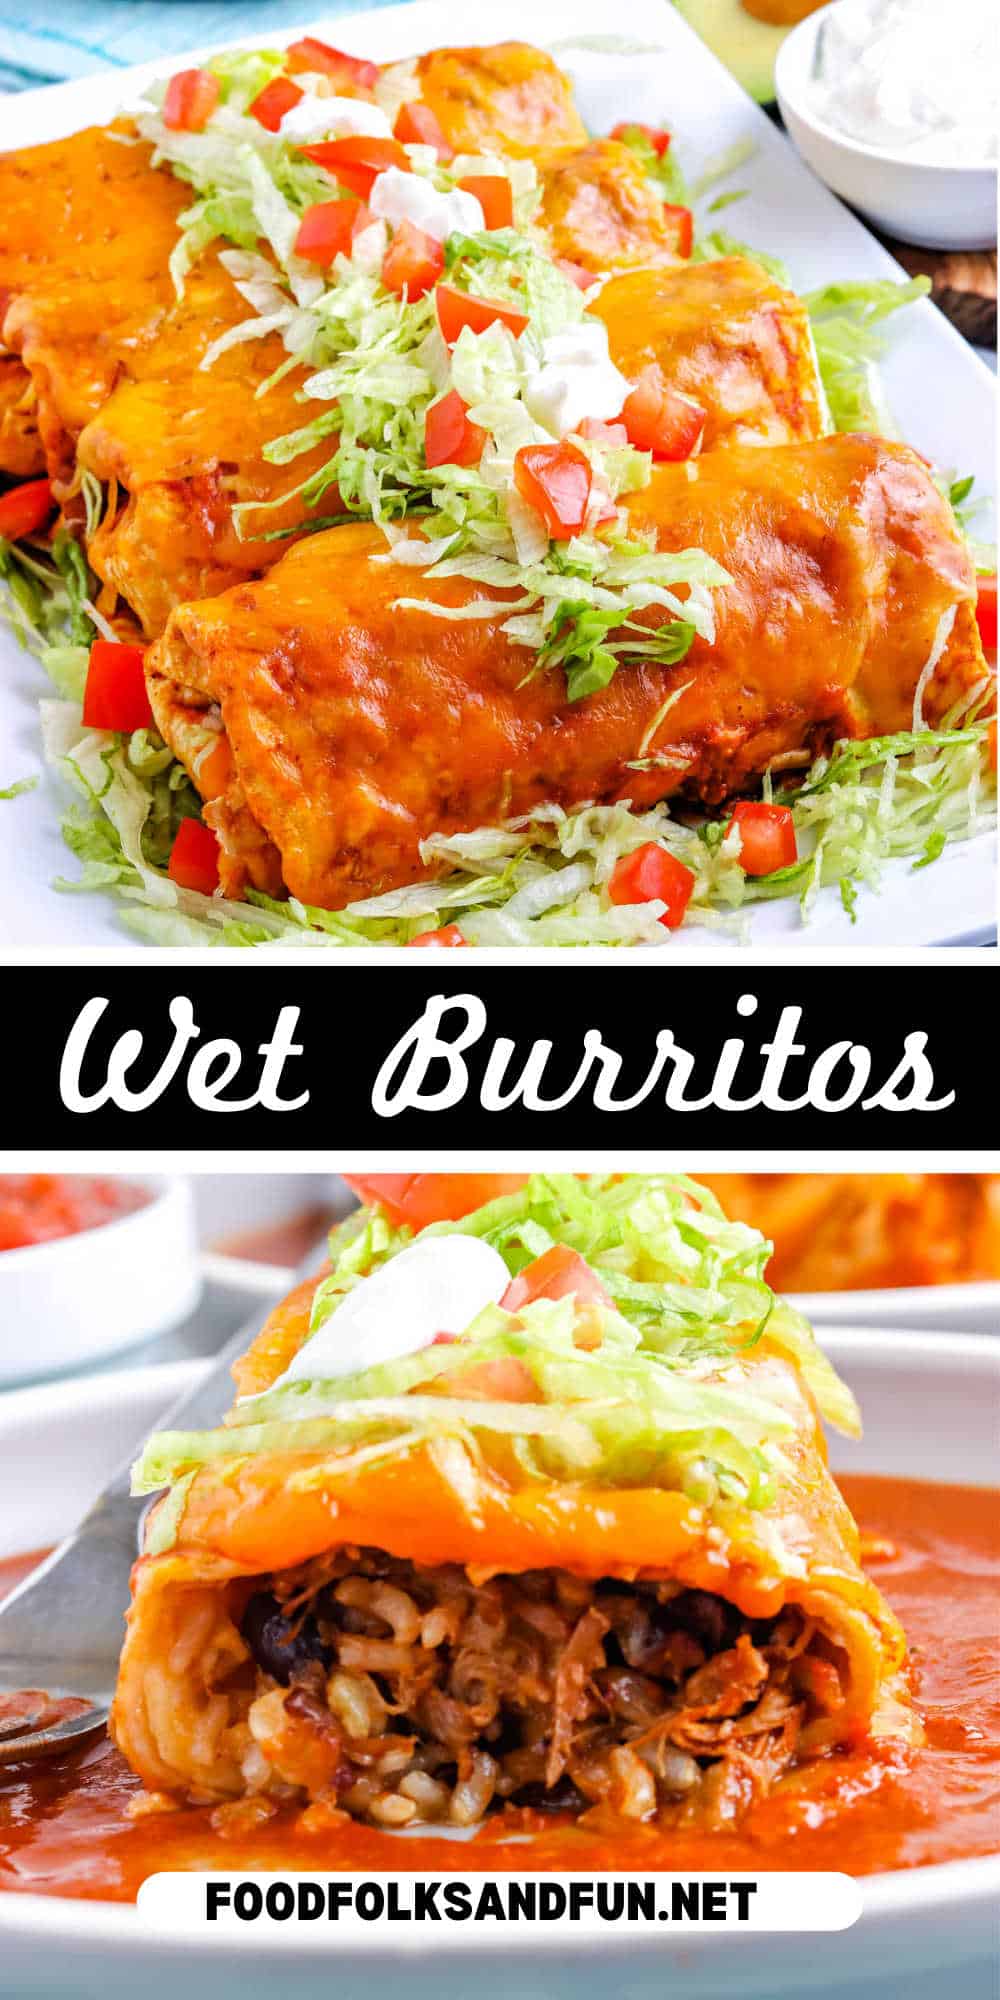 Wet Burritos are baked to golden brown perfection and then smothered in enchilada sauce and a healthy dose of shredded cheese. They're exactly how every burrito should be served! via @foodfolksandfun